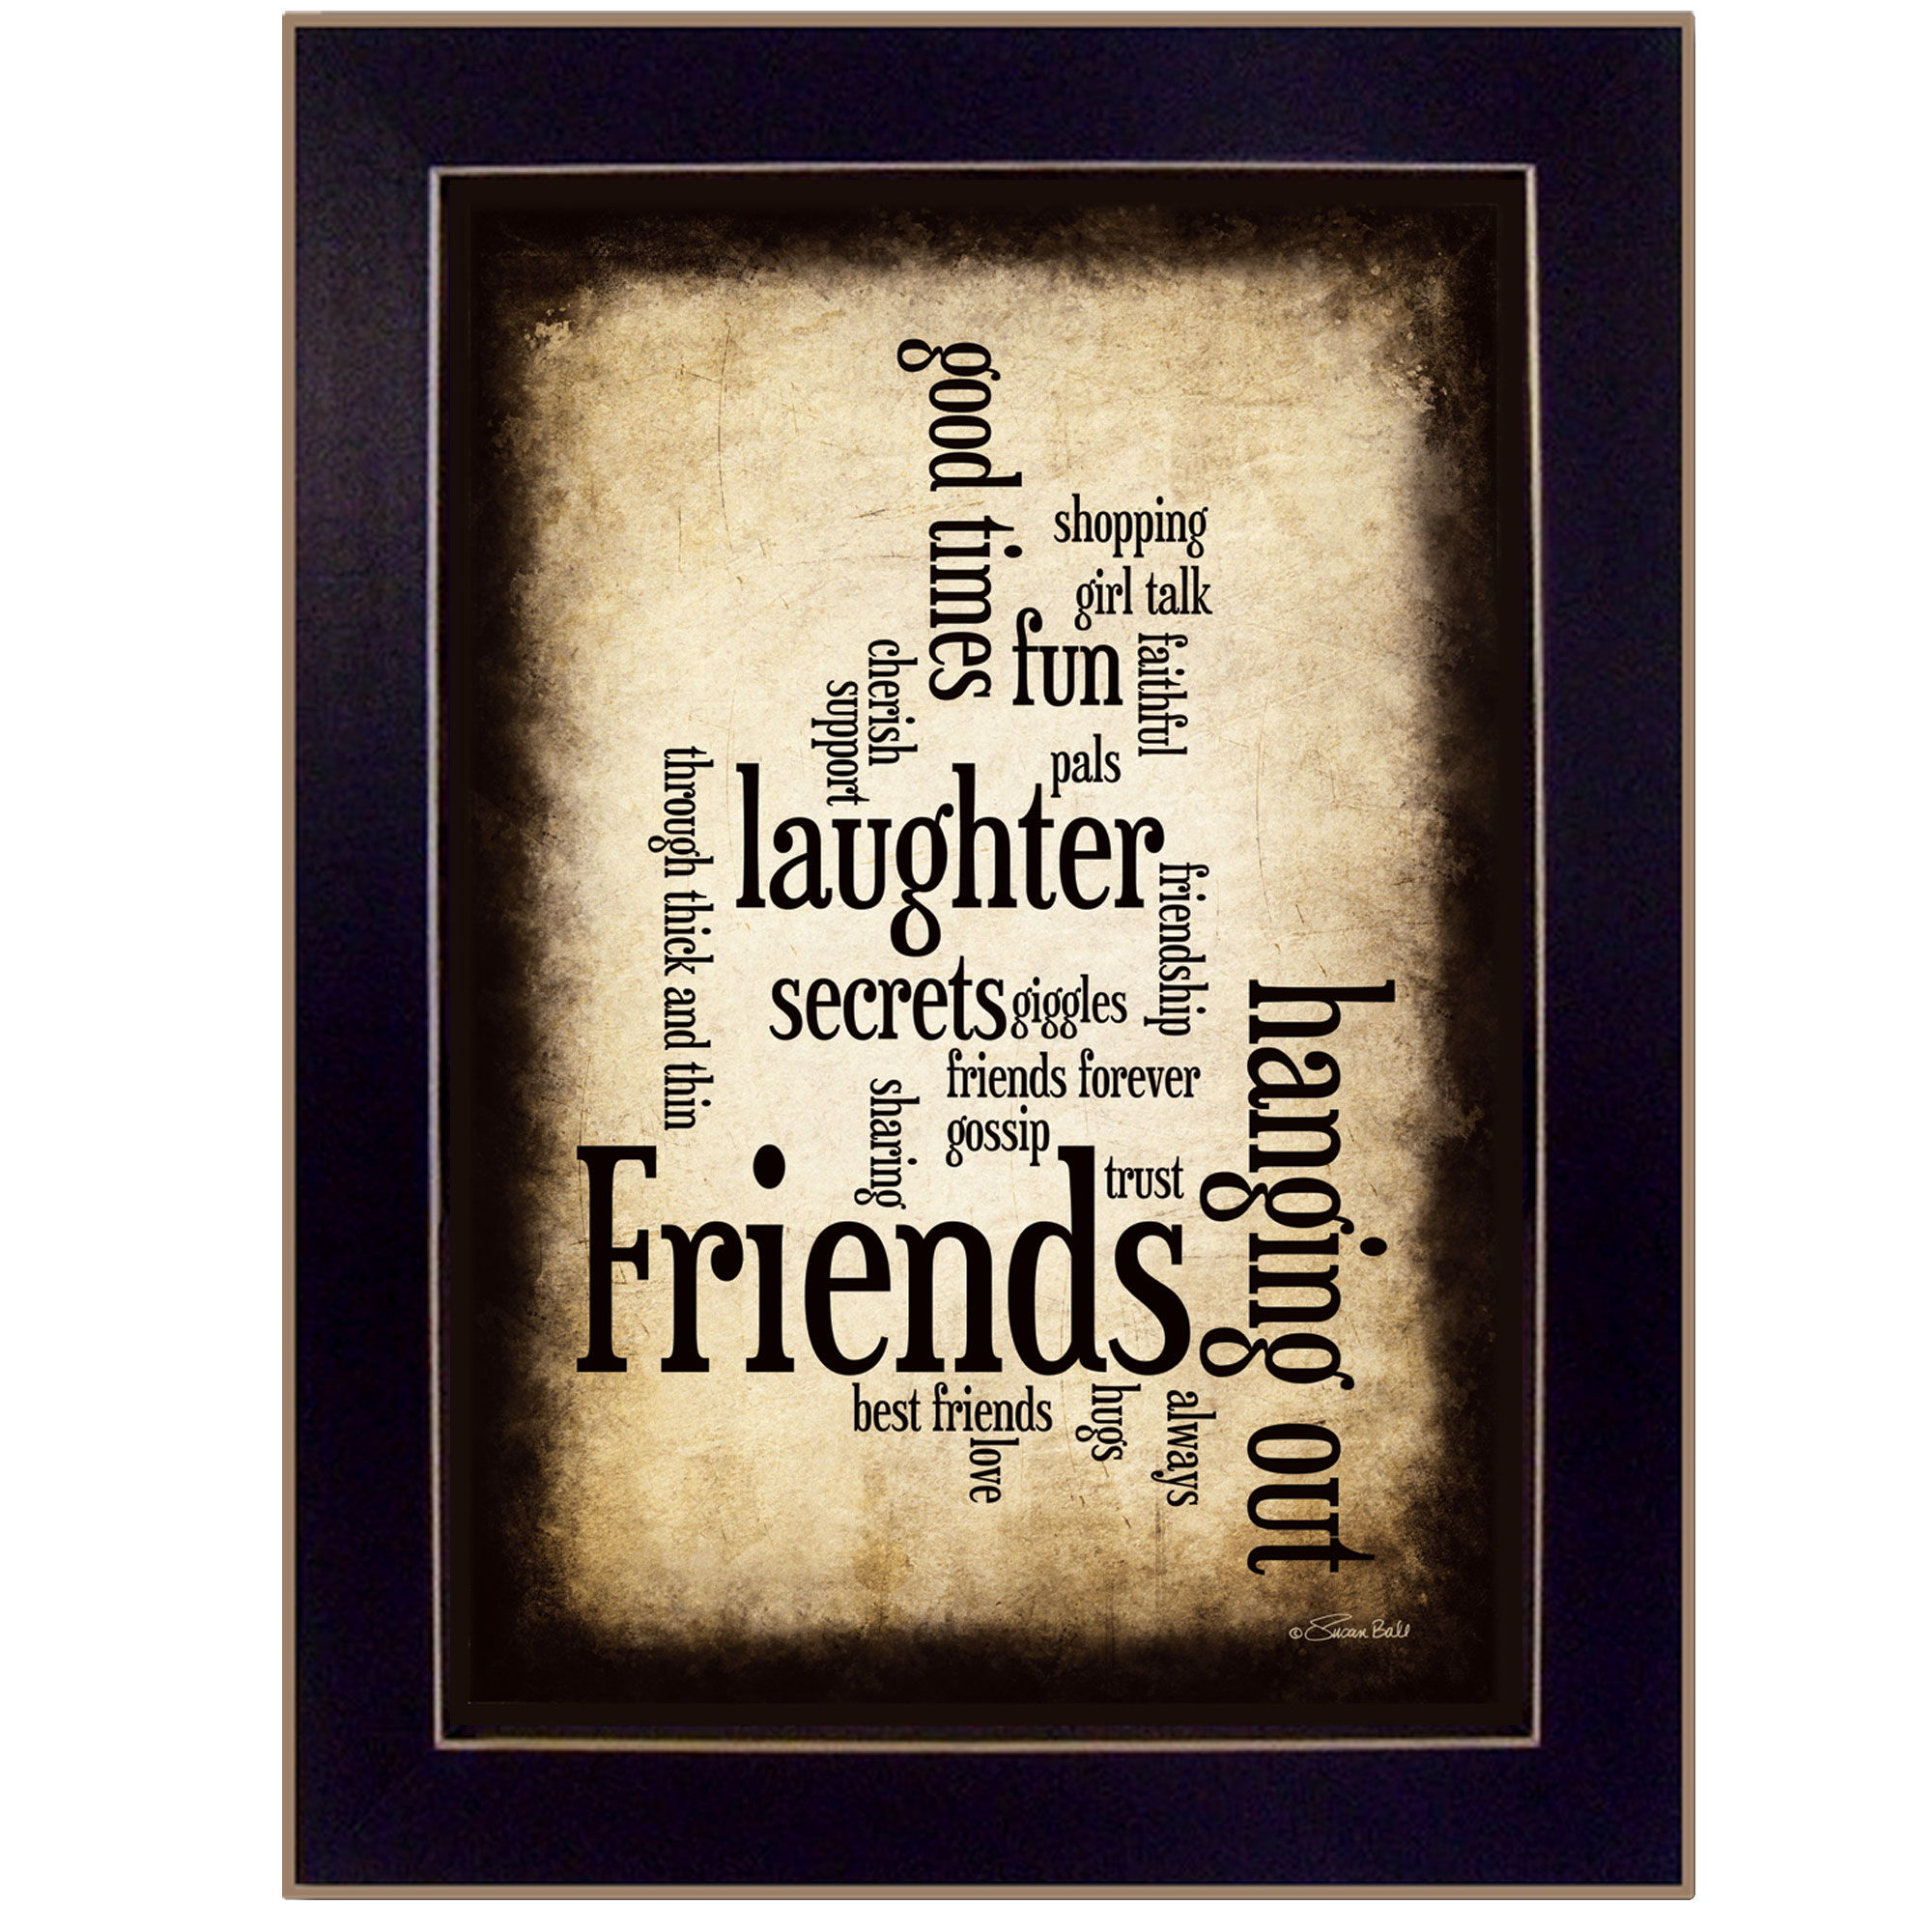 "Friends I" By Susan Ball, Printed Wall Art, Ready To Hang Framed Poster, Black Frame